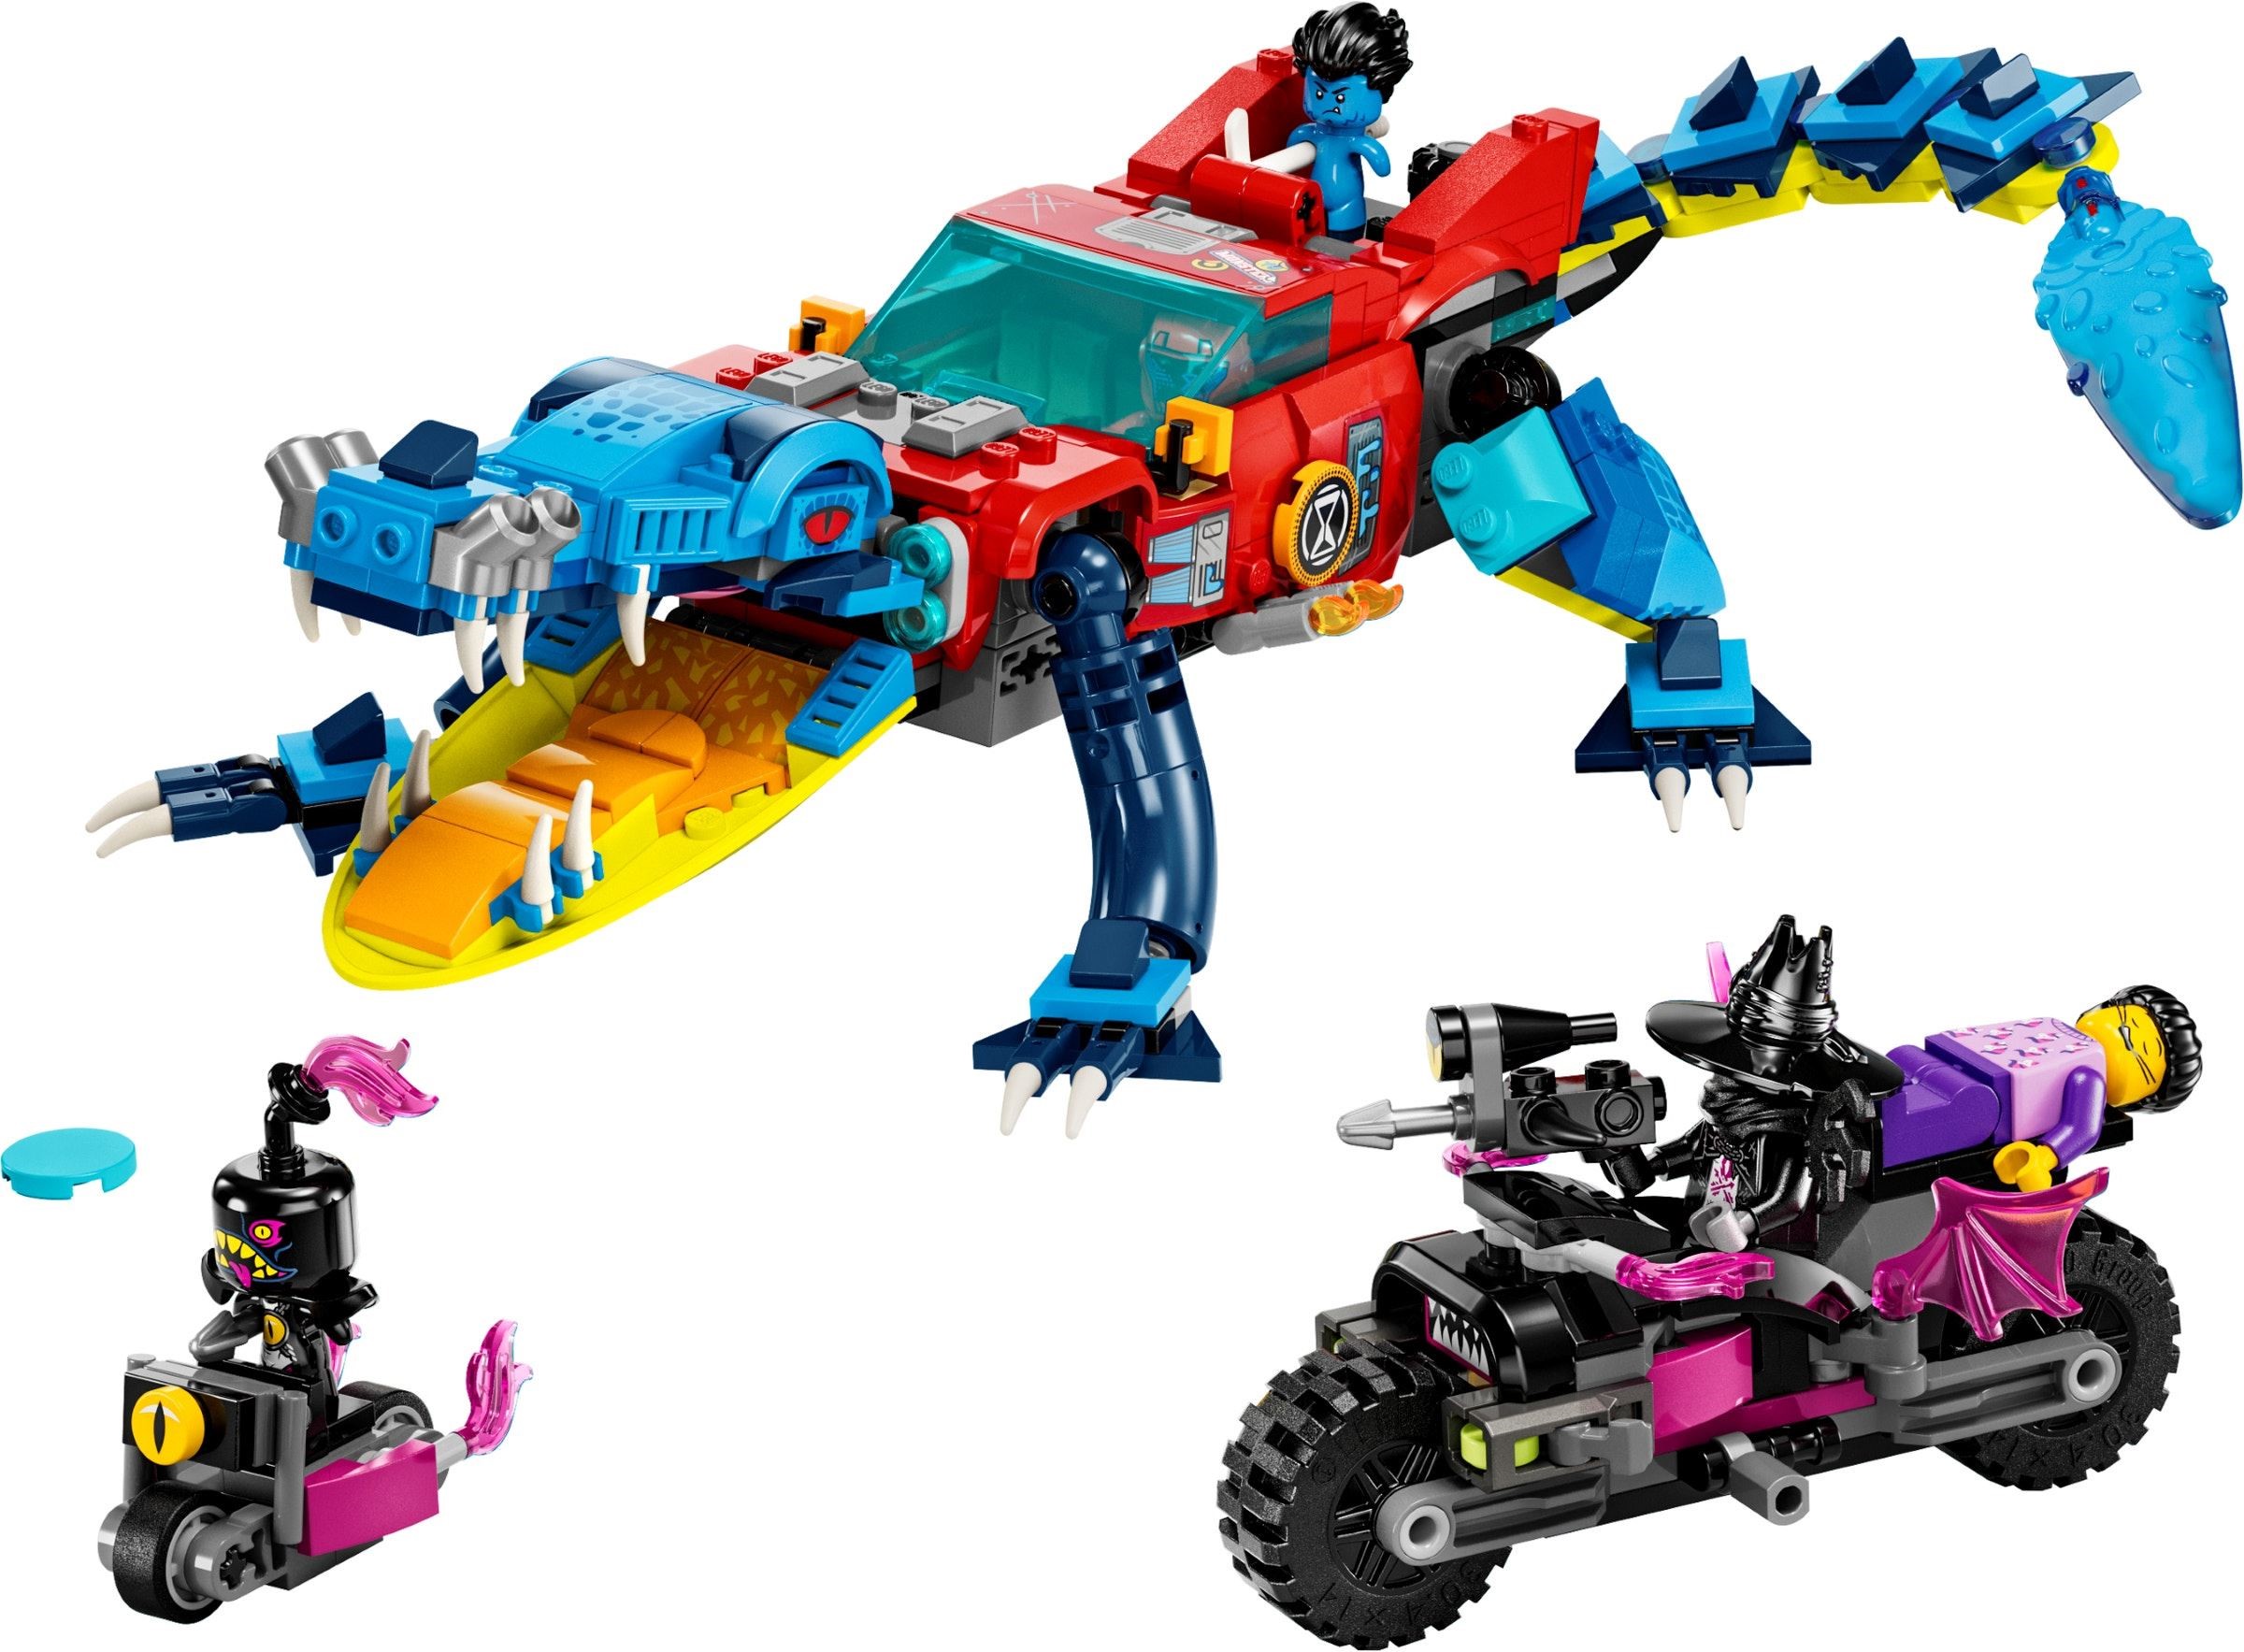 Rumoured list of LEGO Dreamzzz 2023 sets surfaces online